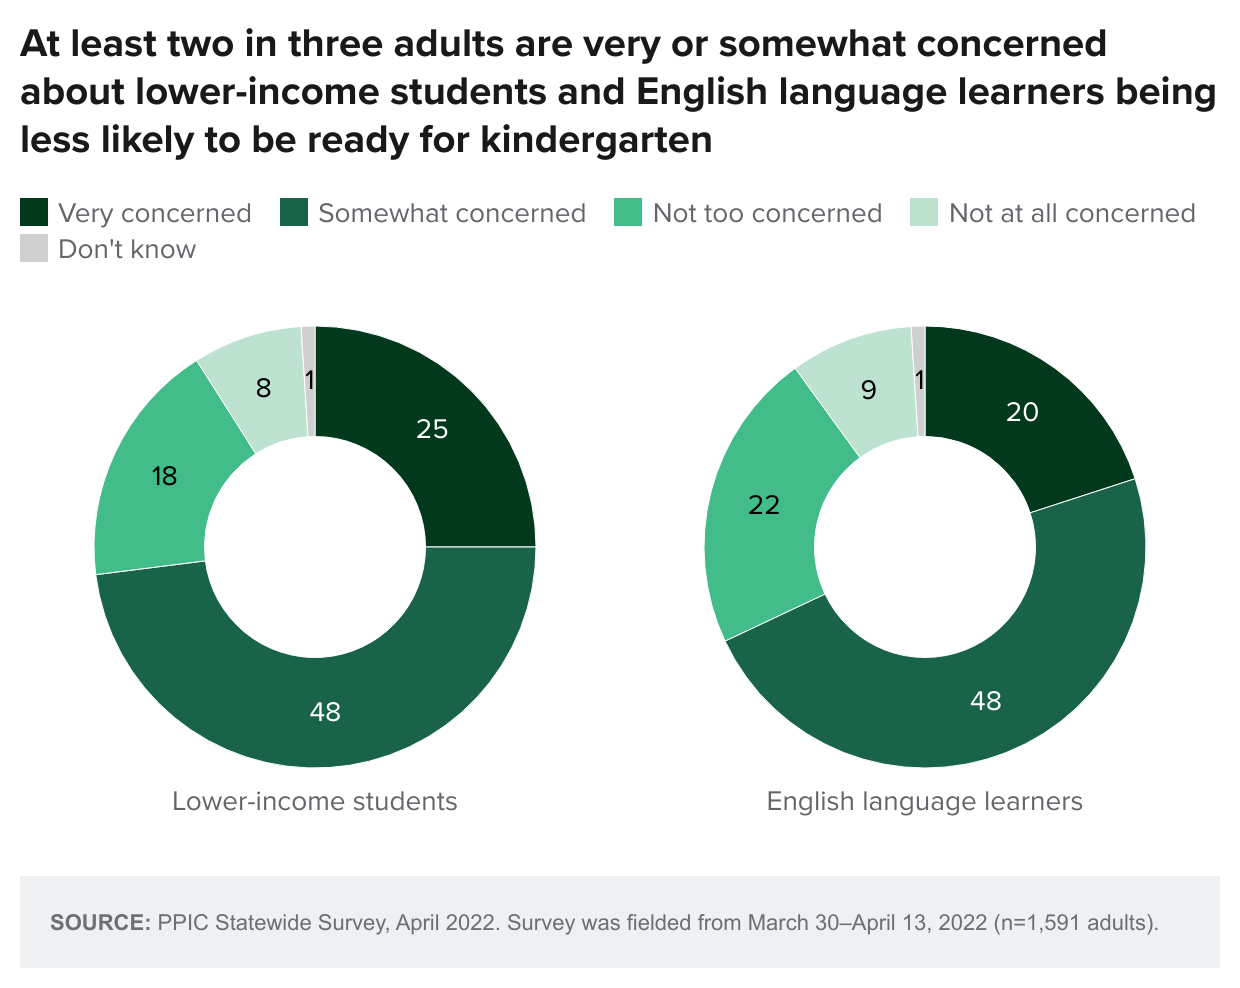 figure - At least two in three adults are very or somewhat concerned about lower-income students and English language learners being less likely to be ready for kindergarten